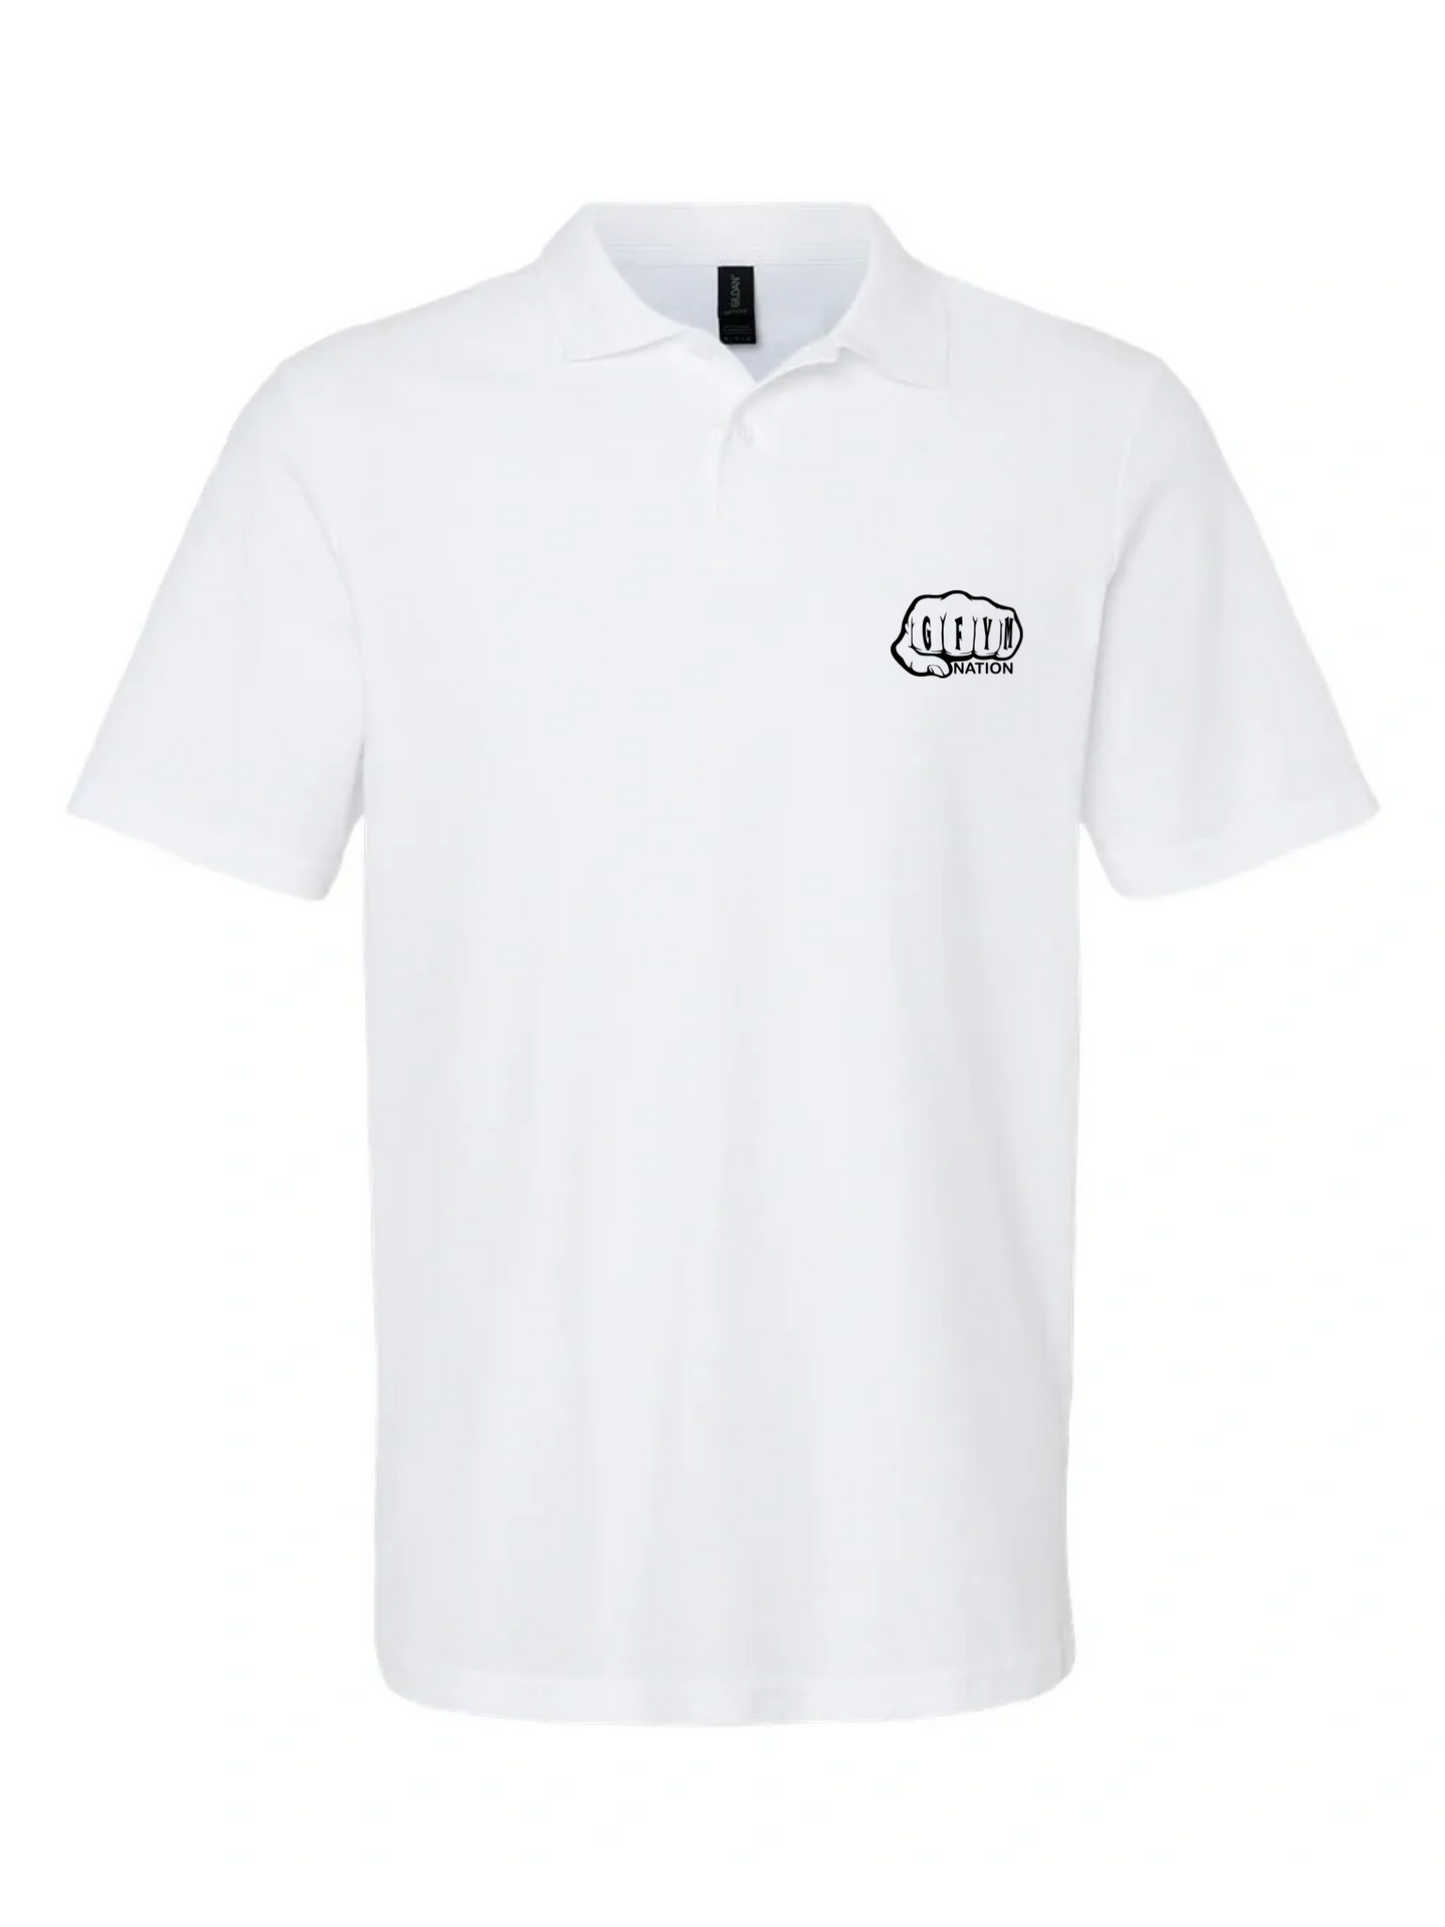 GFYM Embroidered Button Polo